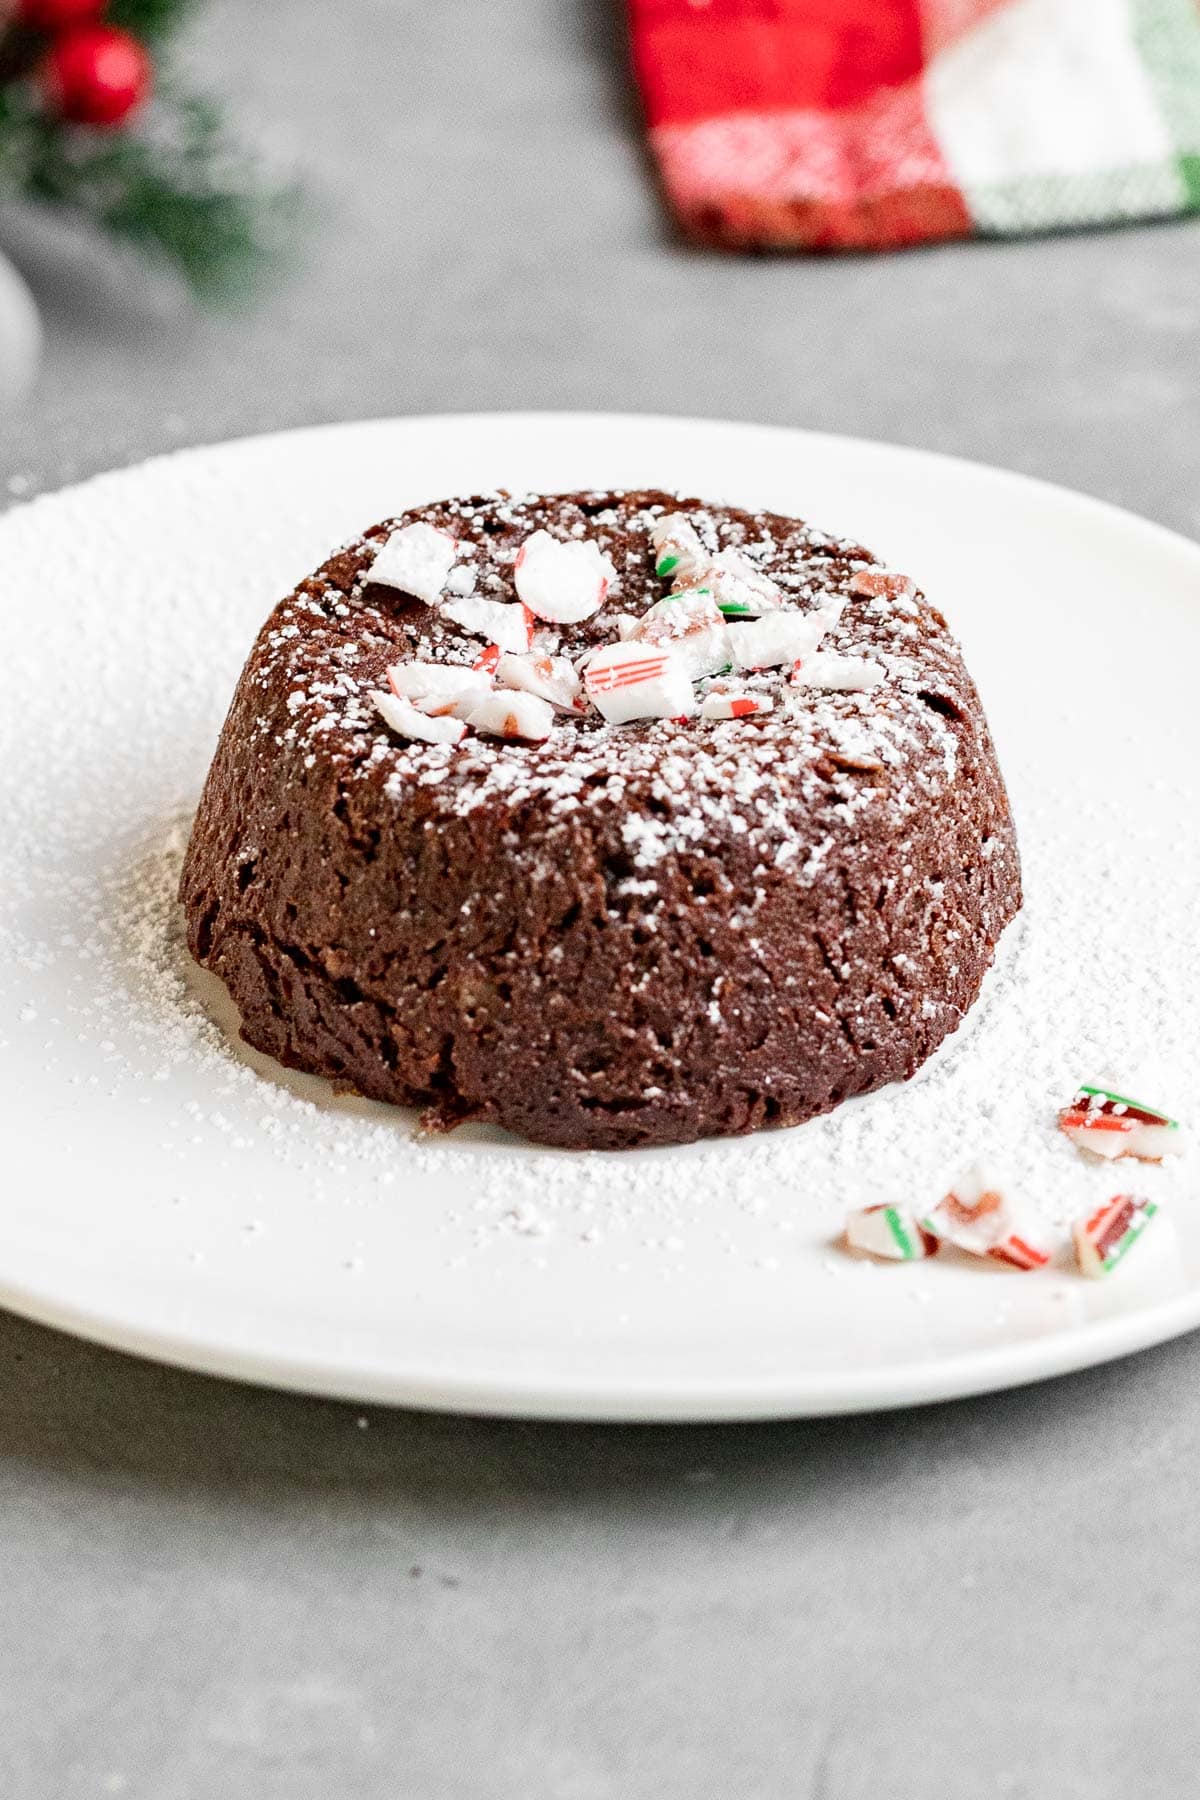 Chocolate Peppermint Lava Cakes dusted with powdered sugar and garnished with crushed peppermint candy